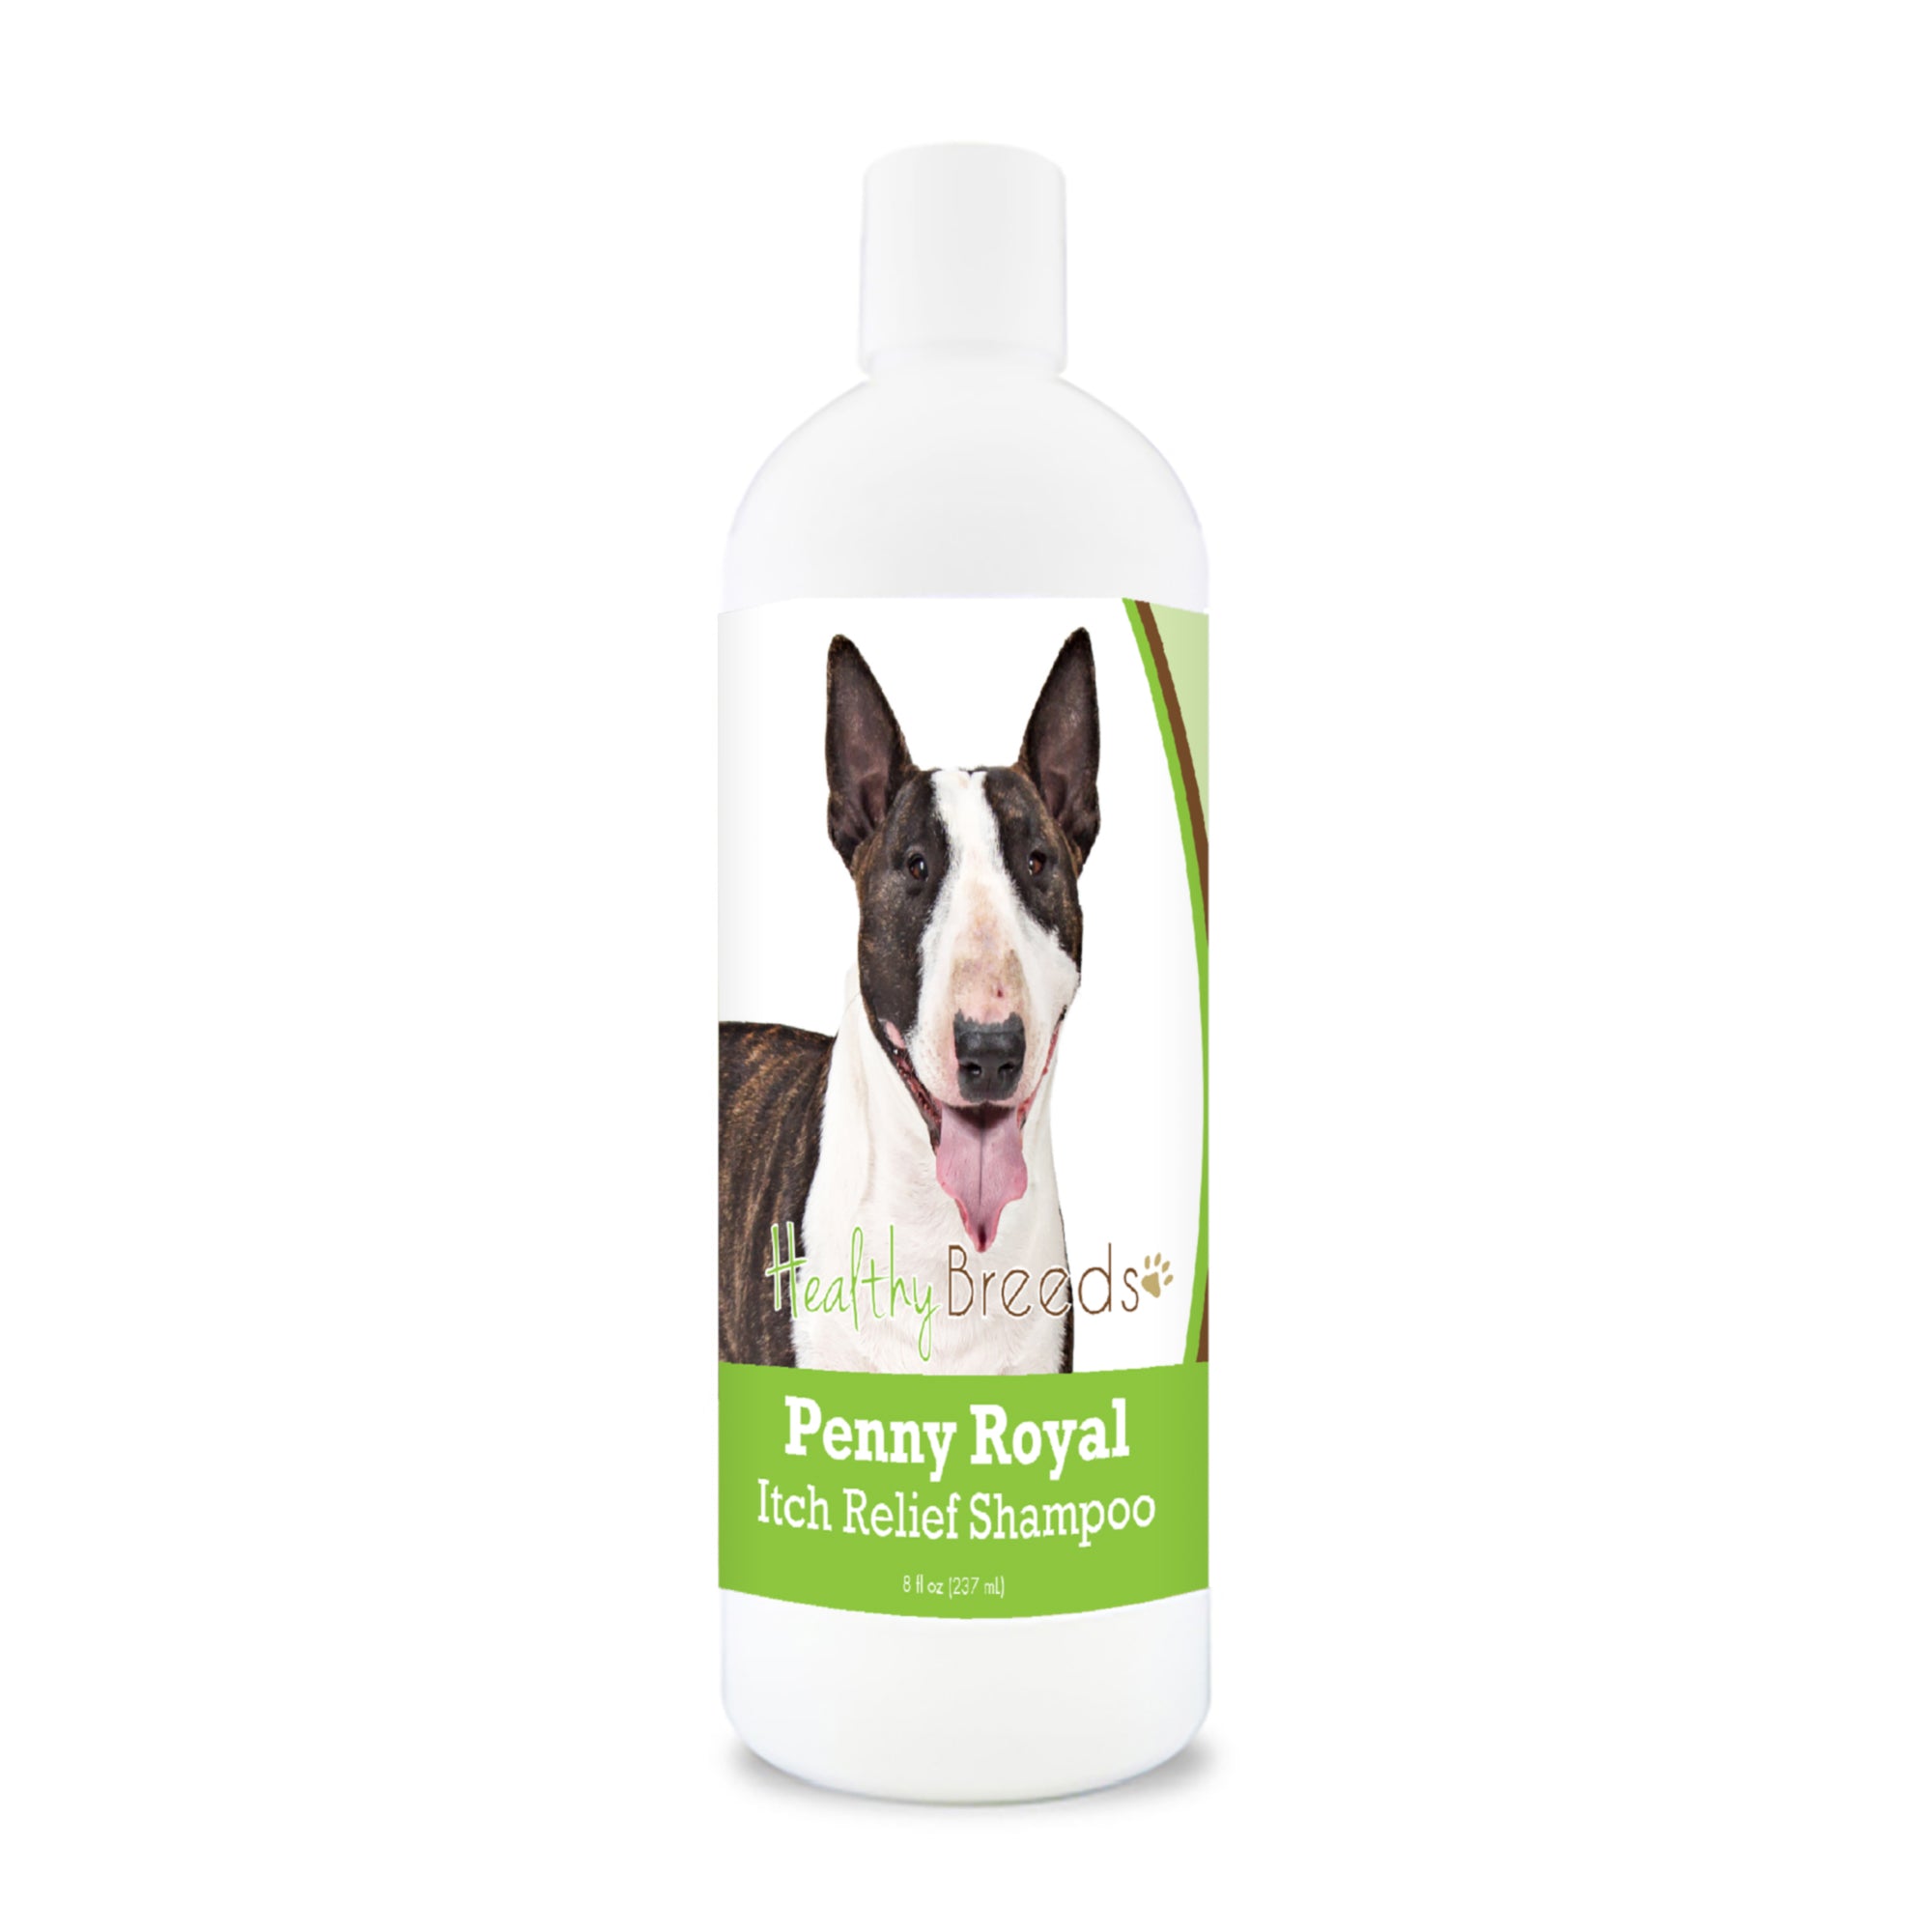 Miniature Bull Terrier Penny Royal Itch Relief Shampoo 8 oz